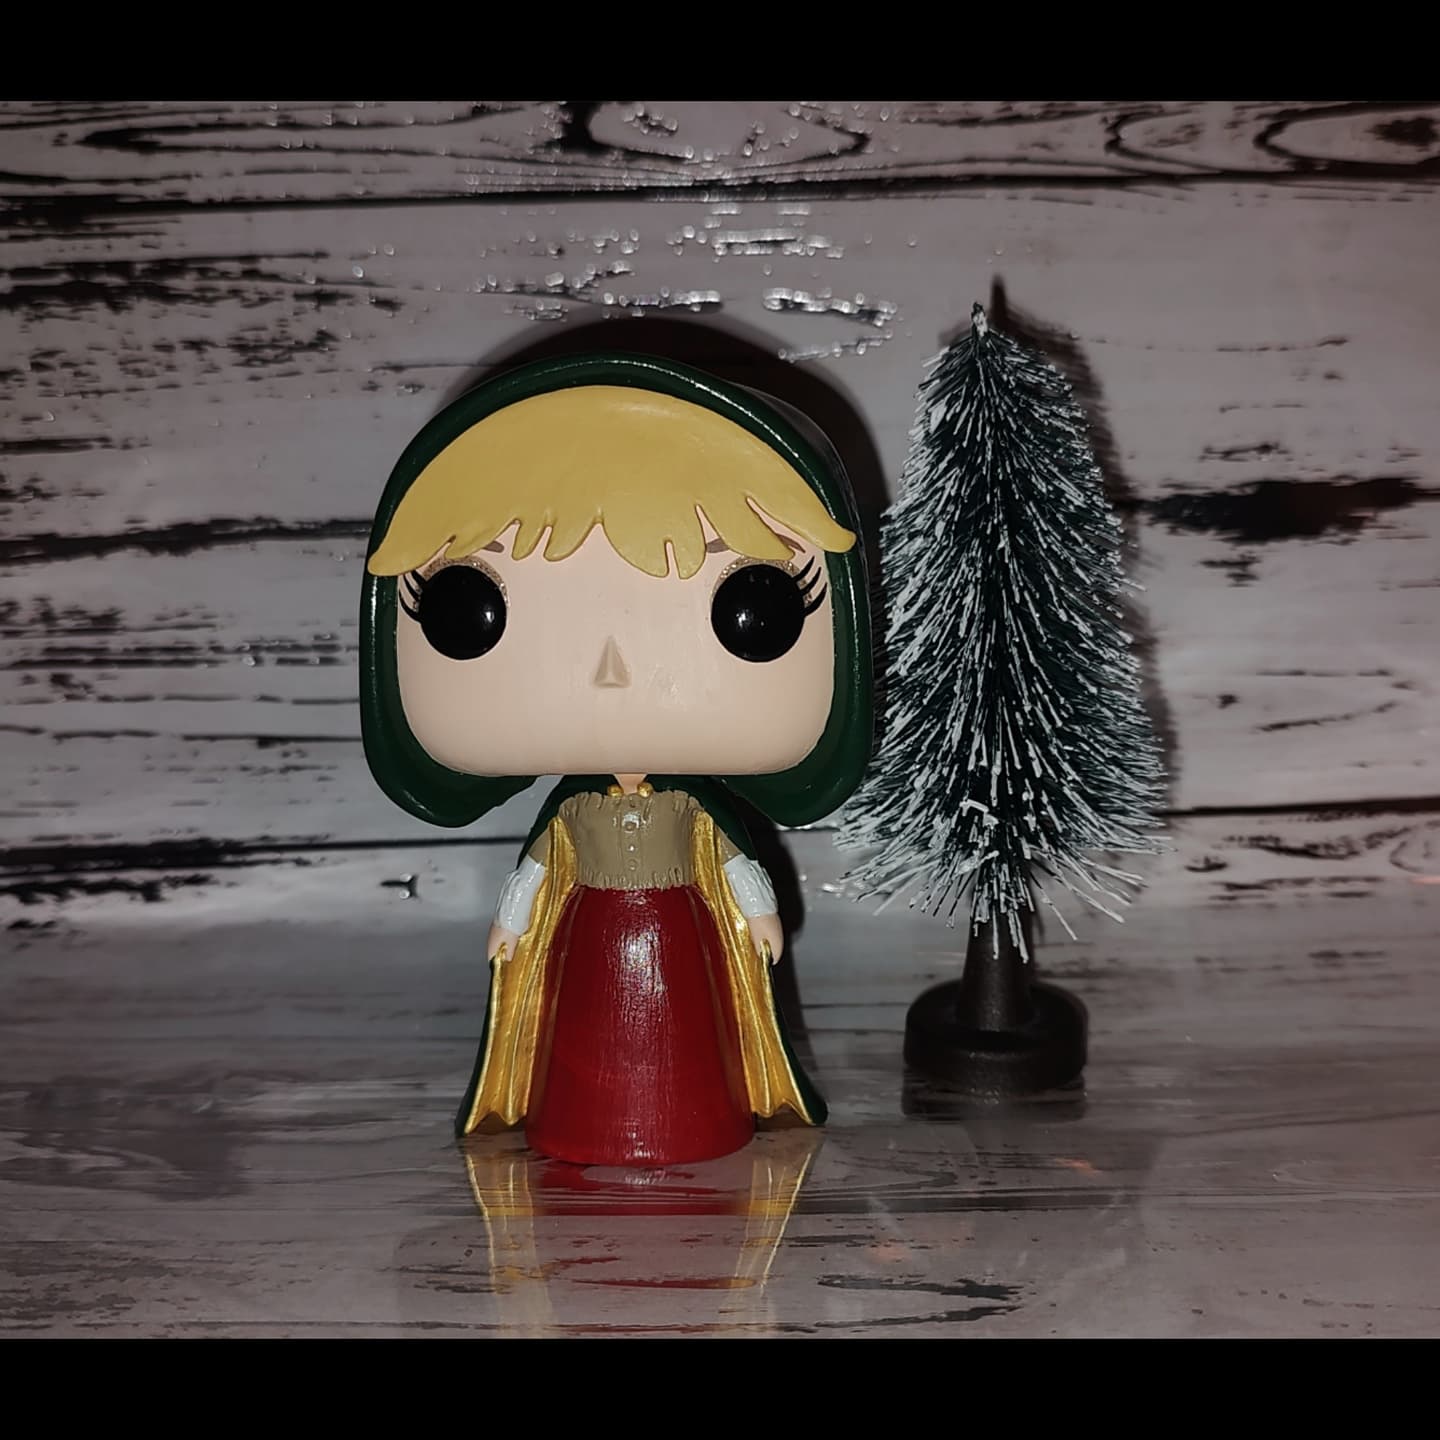 art.off.the.paige / Olivia on X: CUSTOM Taylor Swift Funko Pop - AMAs  Mirrorball - made by me 🪩 #taylorswift #taylor #swift #swiftie #mirrorball  #discoball #light #shimmer #iridescent #rainbow #color #fearless #speaknow  #red #